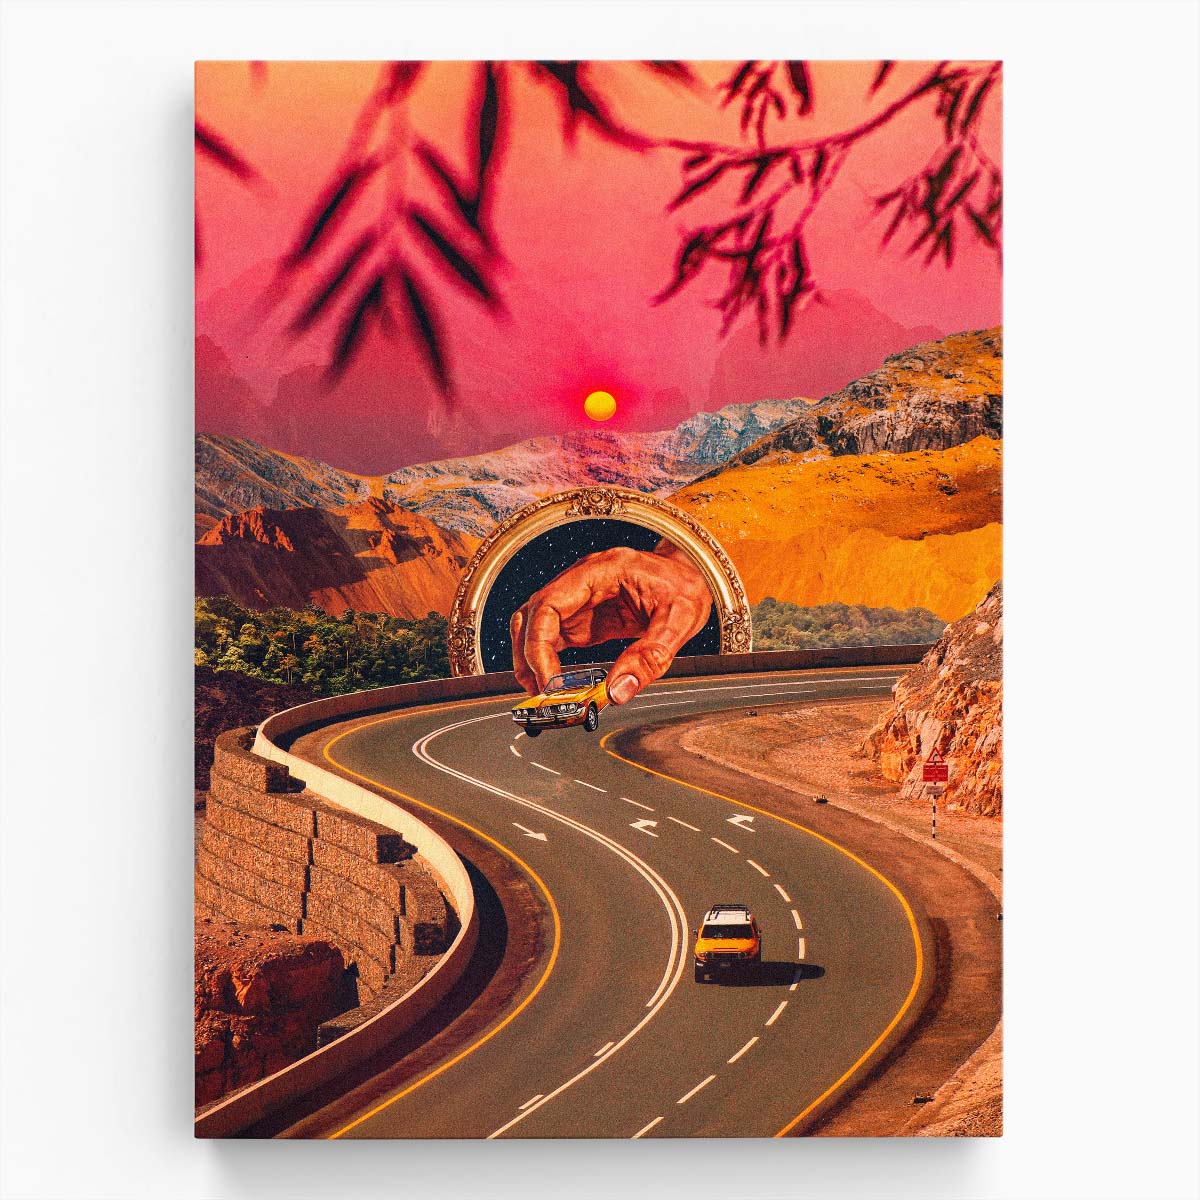 Vintage Car Road Trip Surreal Collage Illustration by Taudalpoi by Luxuriance Designs, made in USA